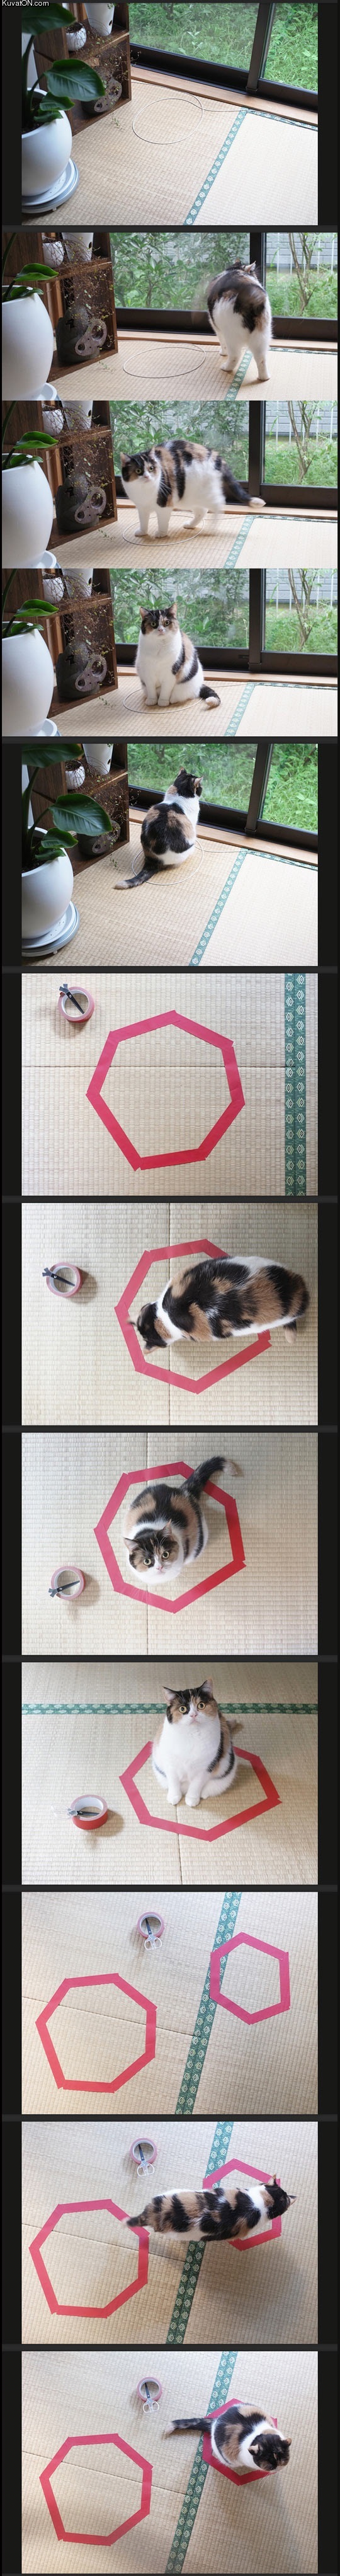 trick_your_cat_with_a_circle.jpg